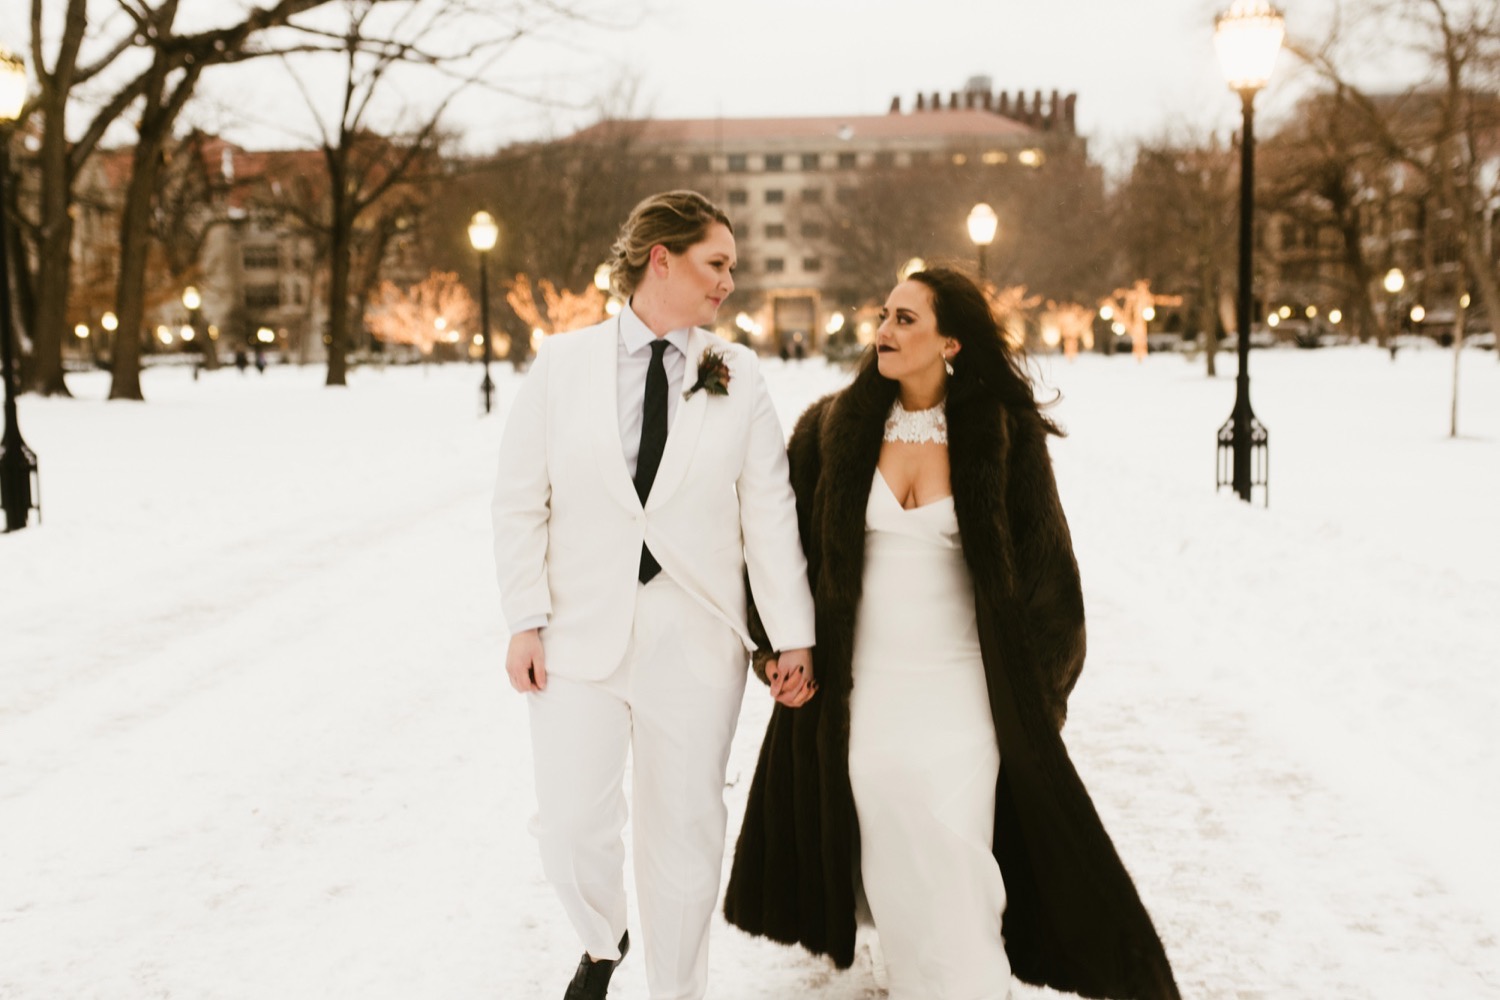 Chicago brides holding hands walking through the snow.